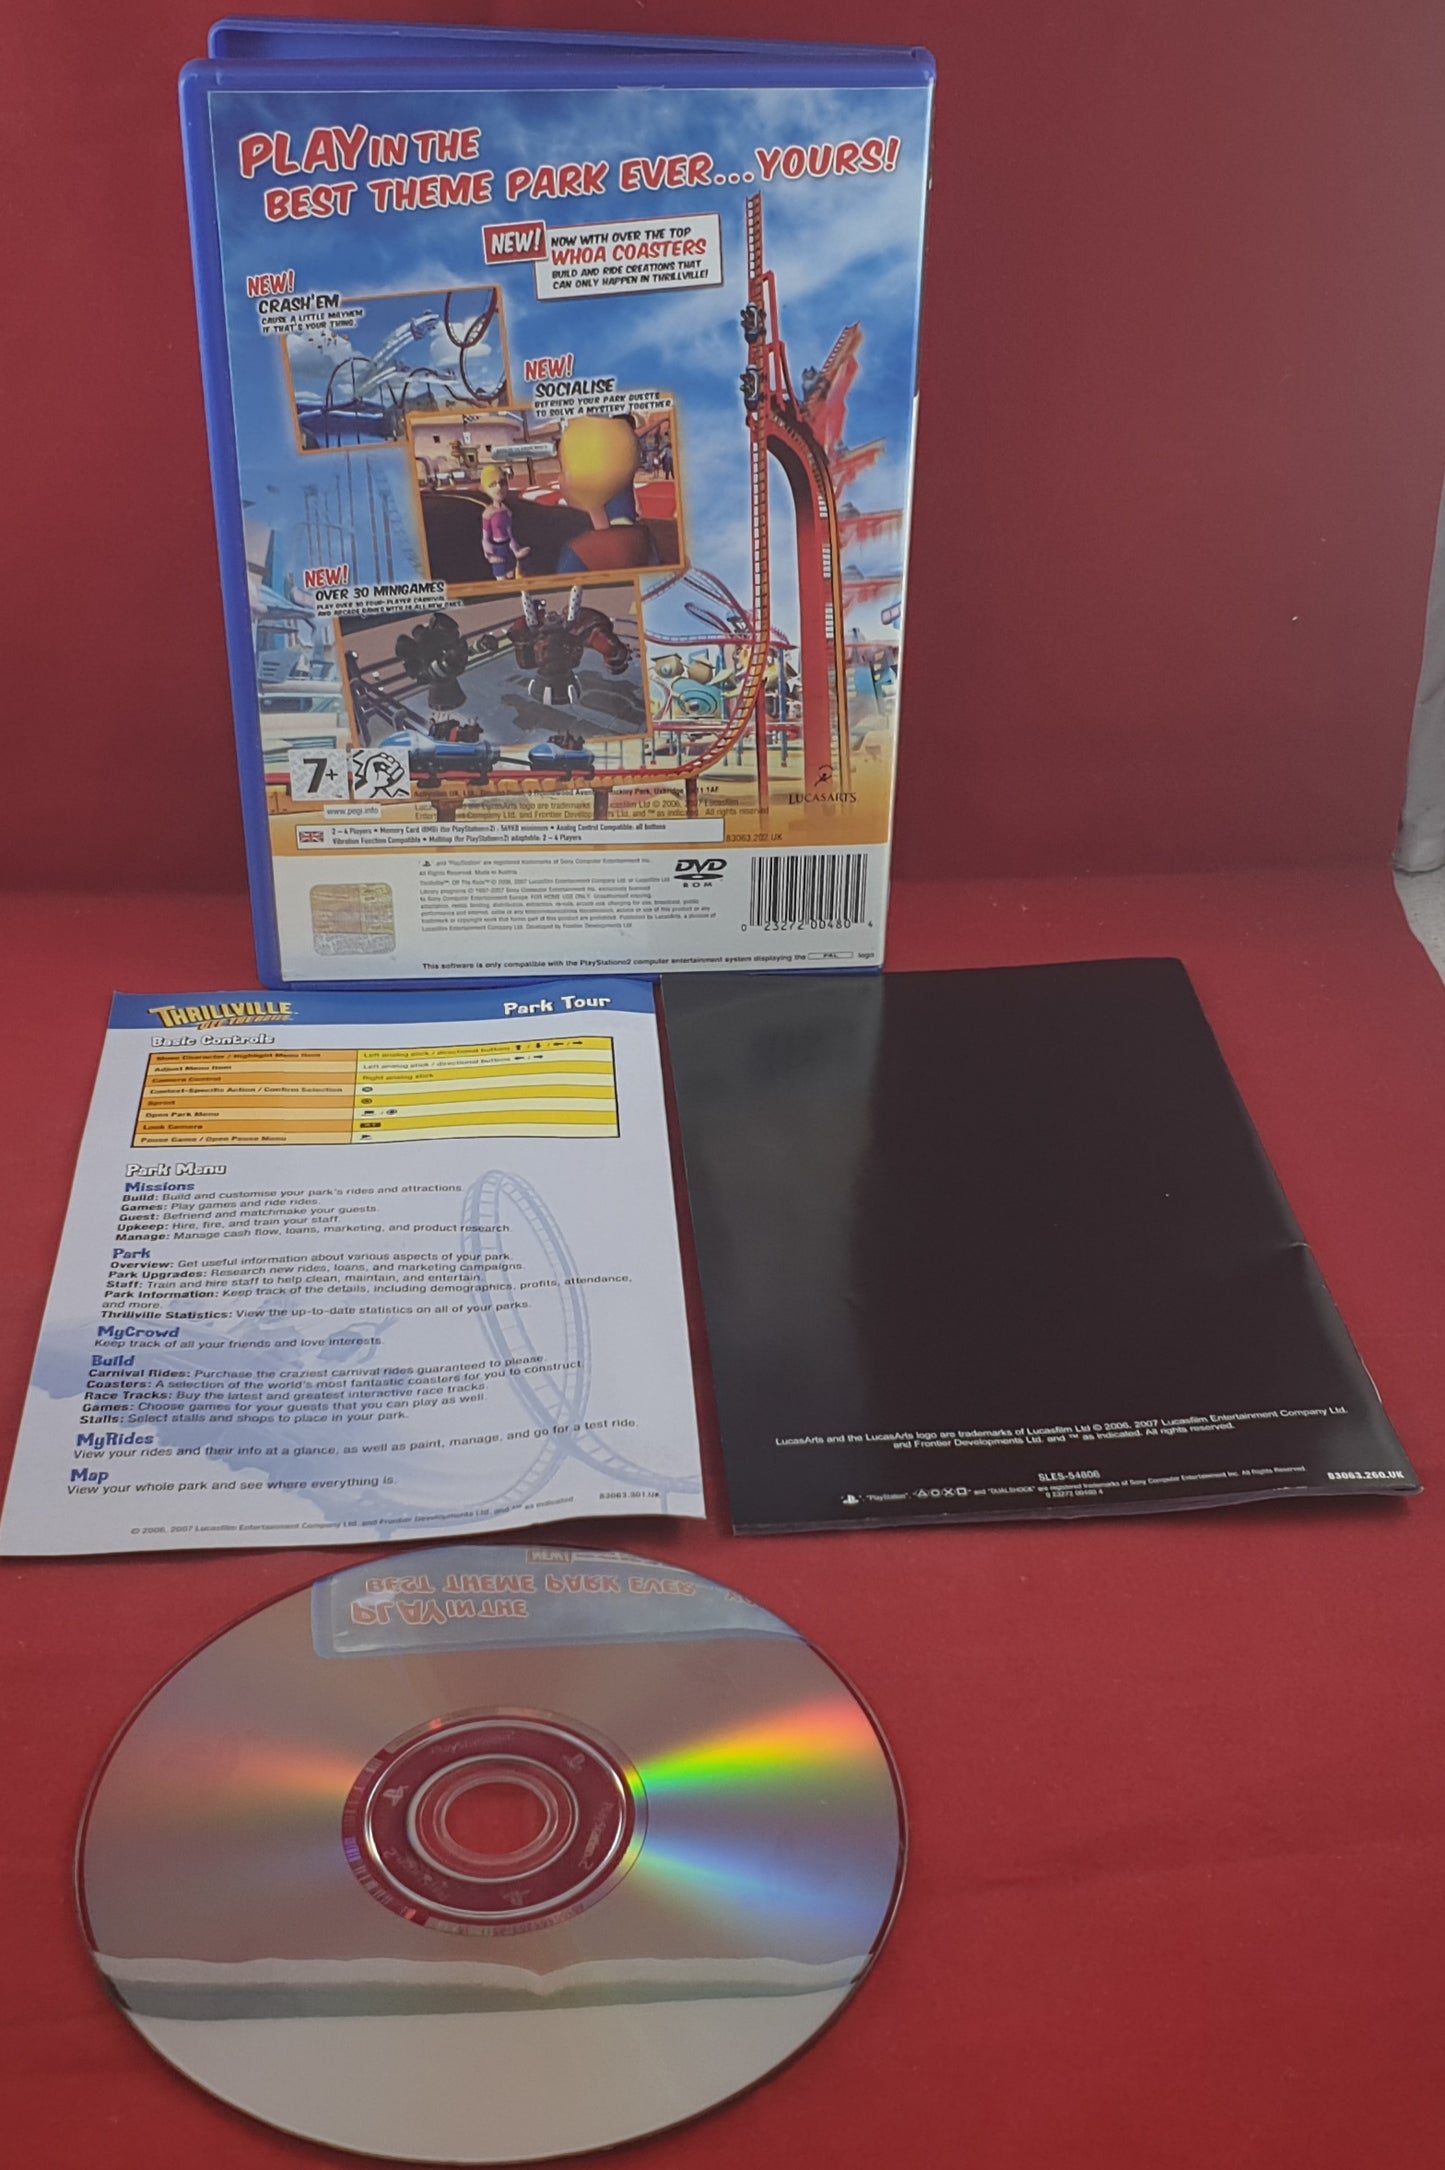 Thrillville off the Rails Sony Playstation 2 (PS2) Game